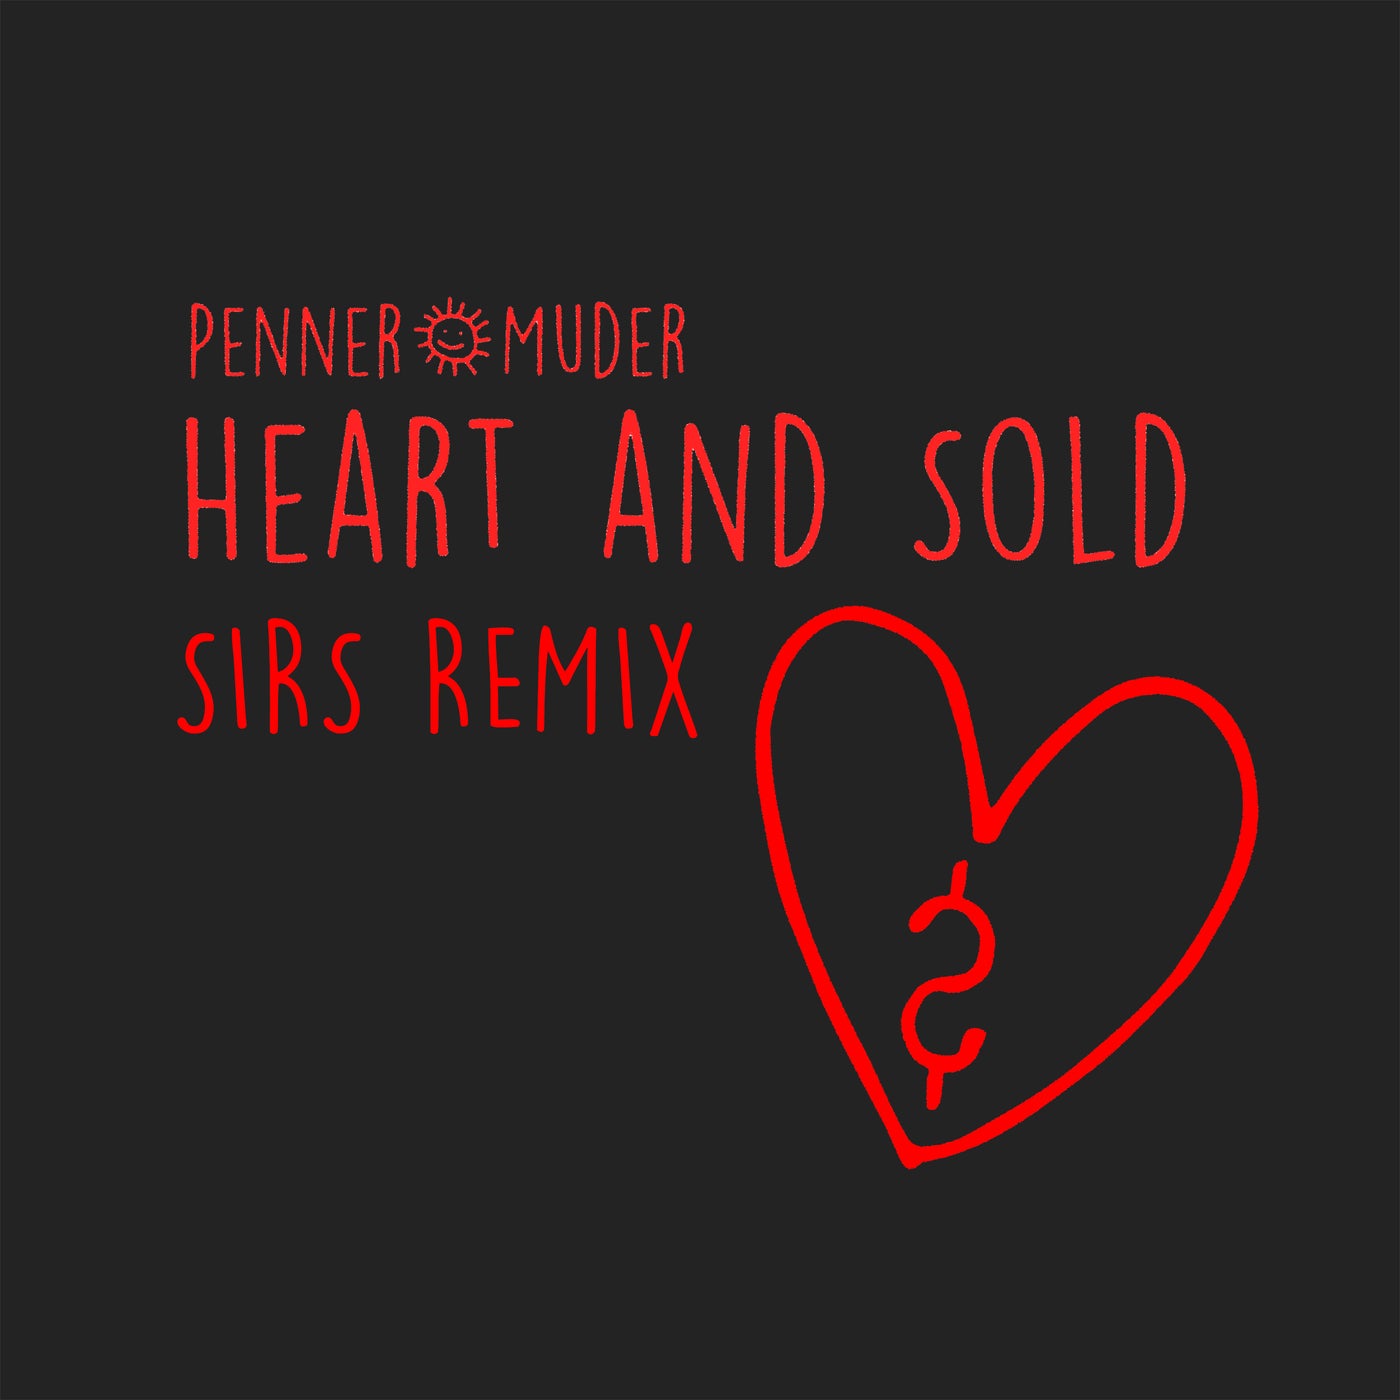 Heart And Sold (SIRS Remix)